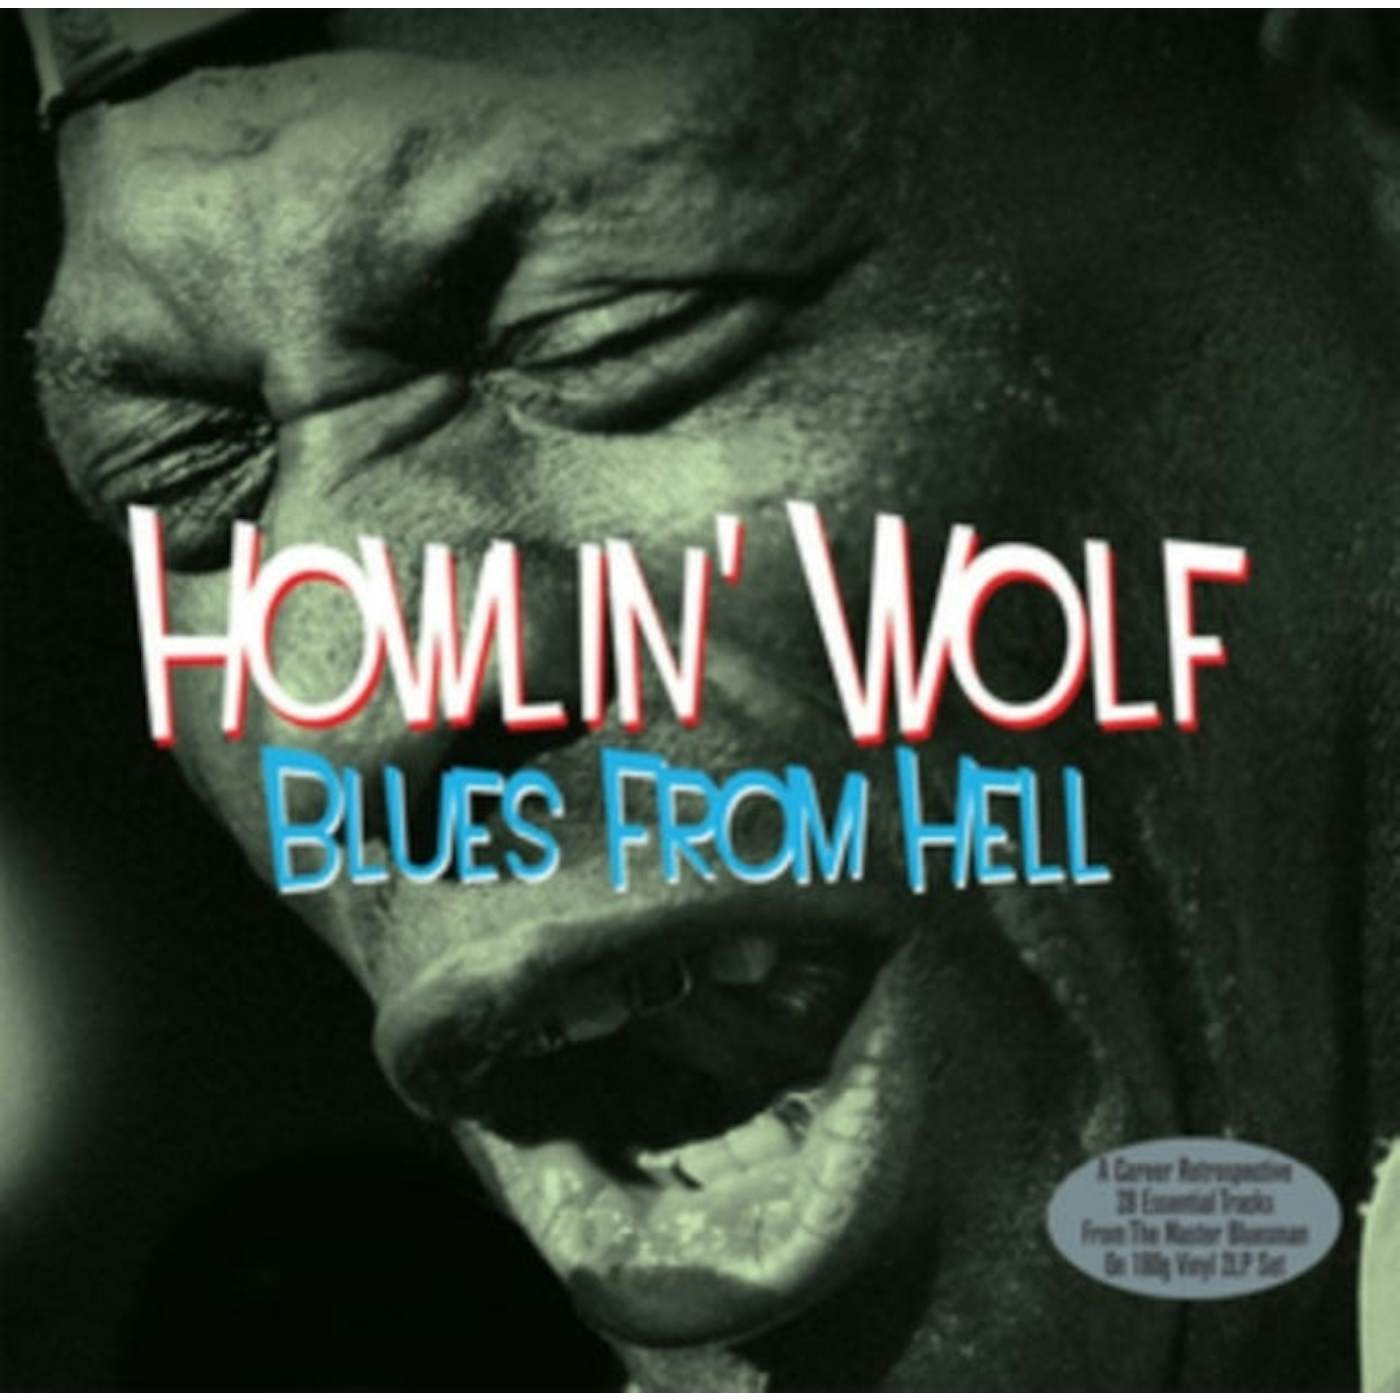 Howlin' Wolf LP Vinyl Record - Blues From Hell